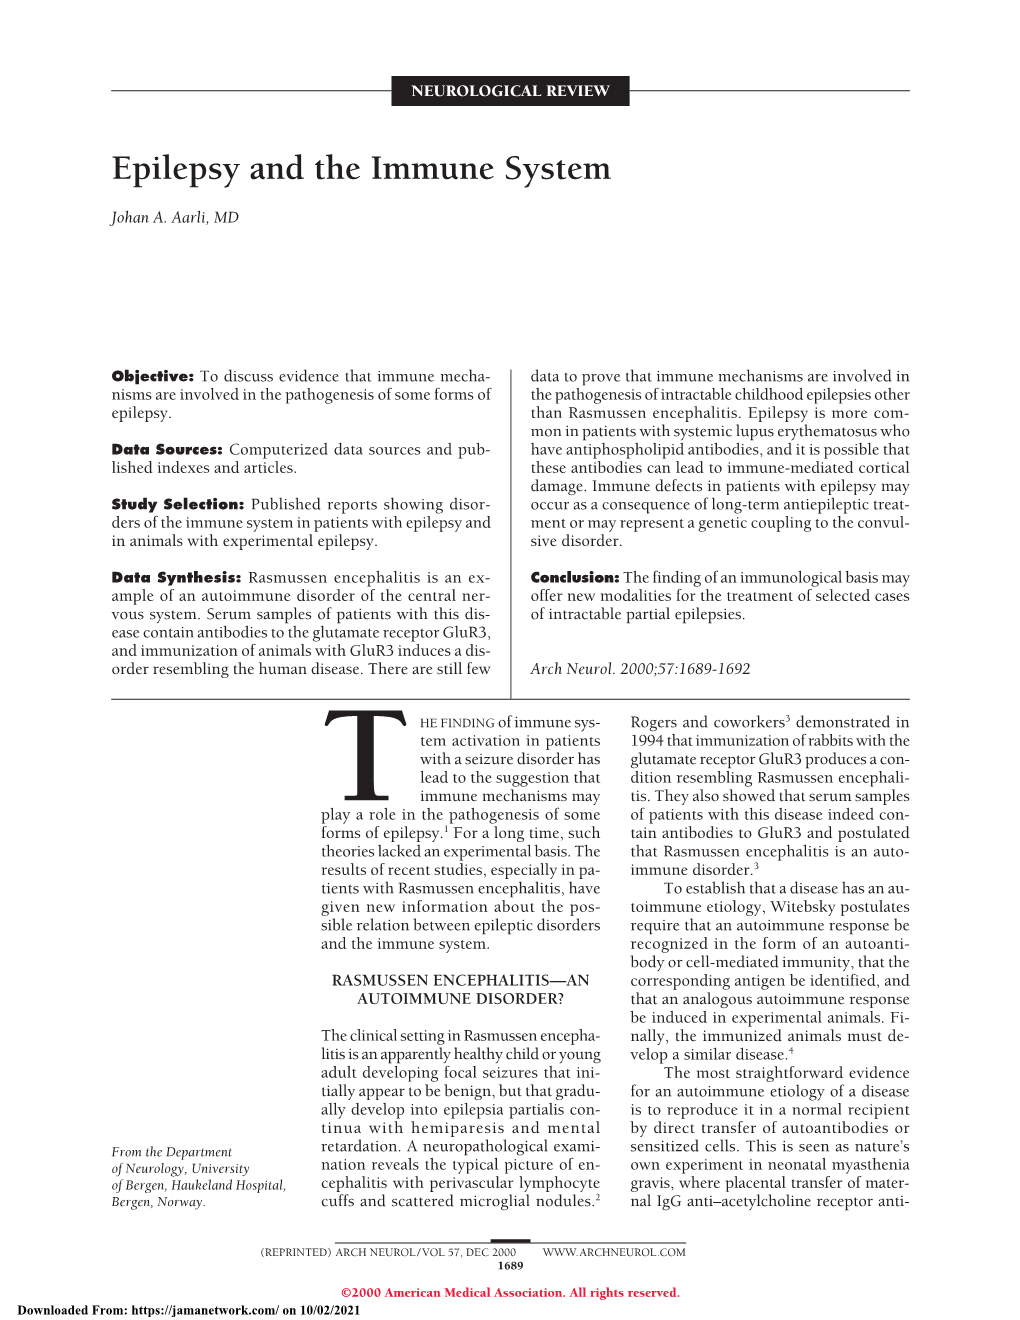 Epilepsy and the Immune System